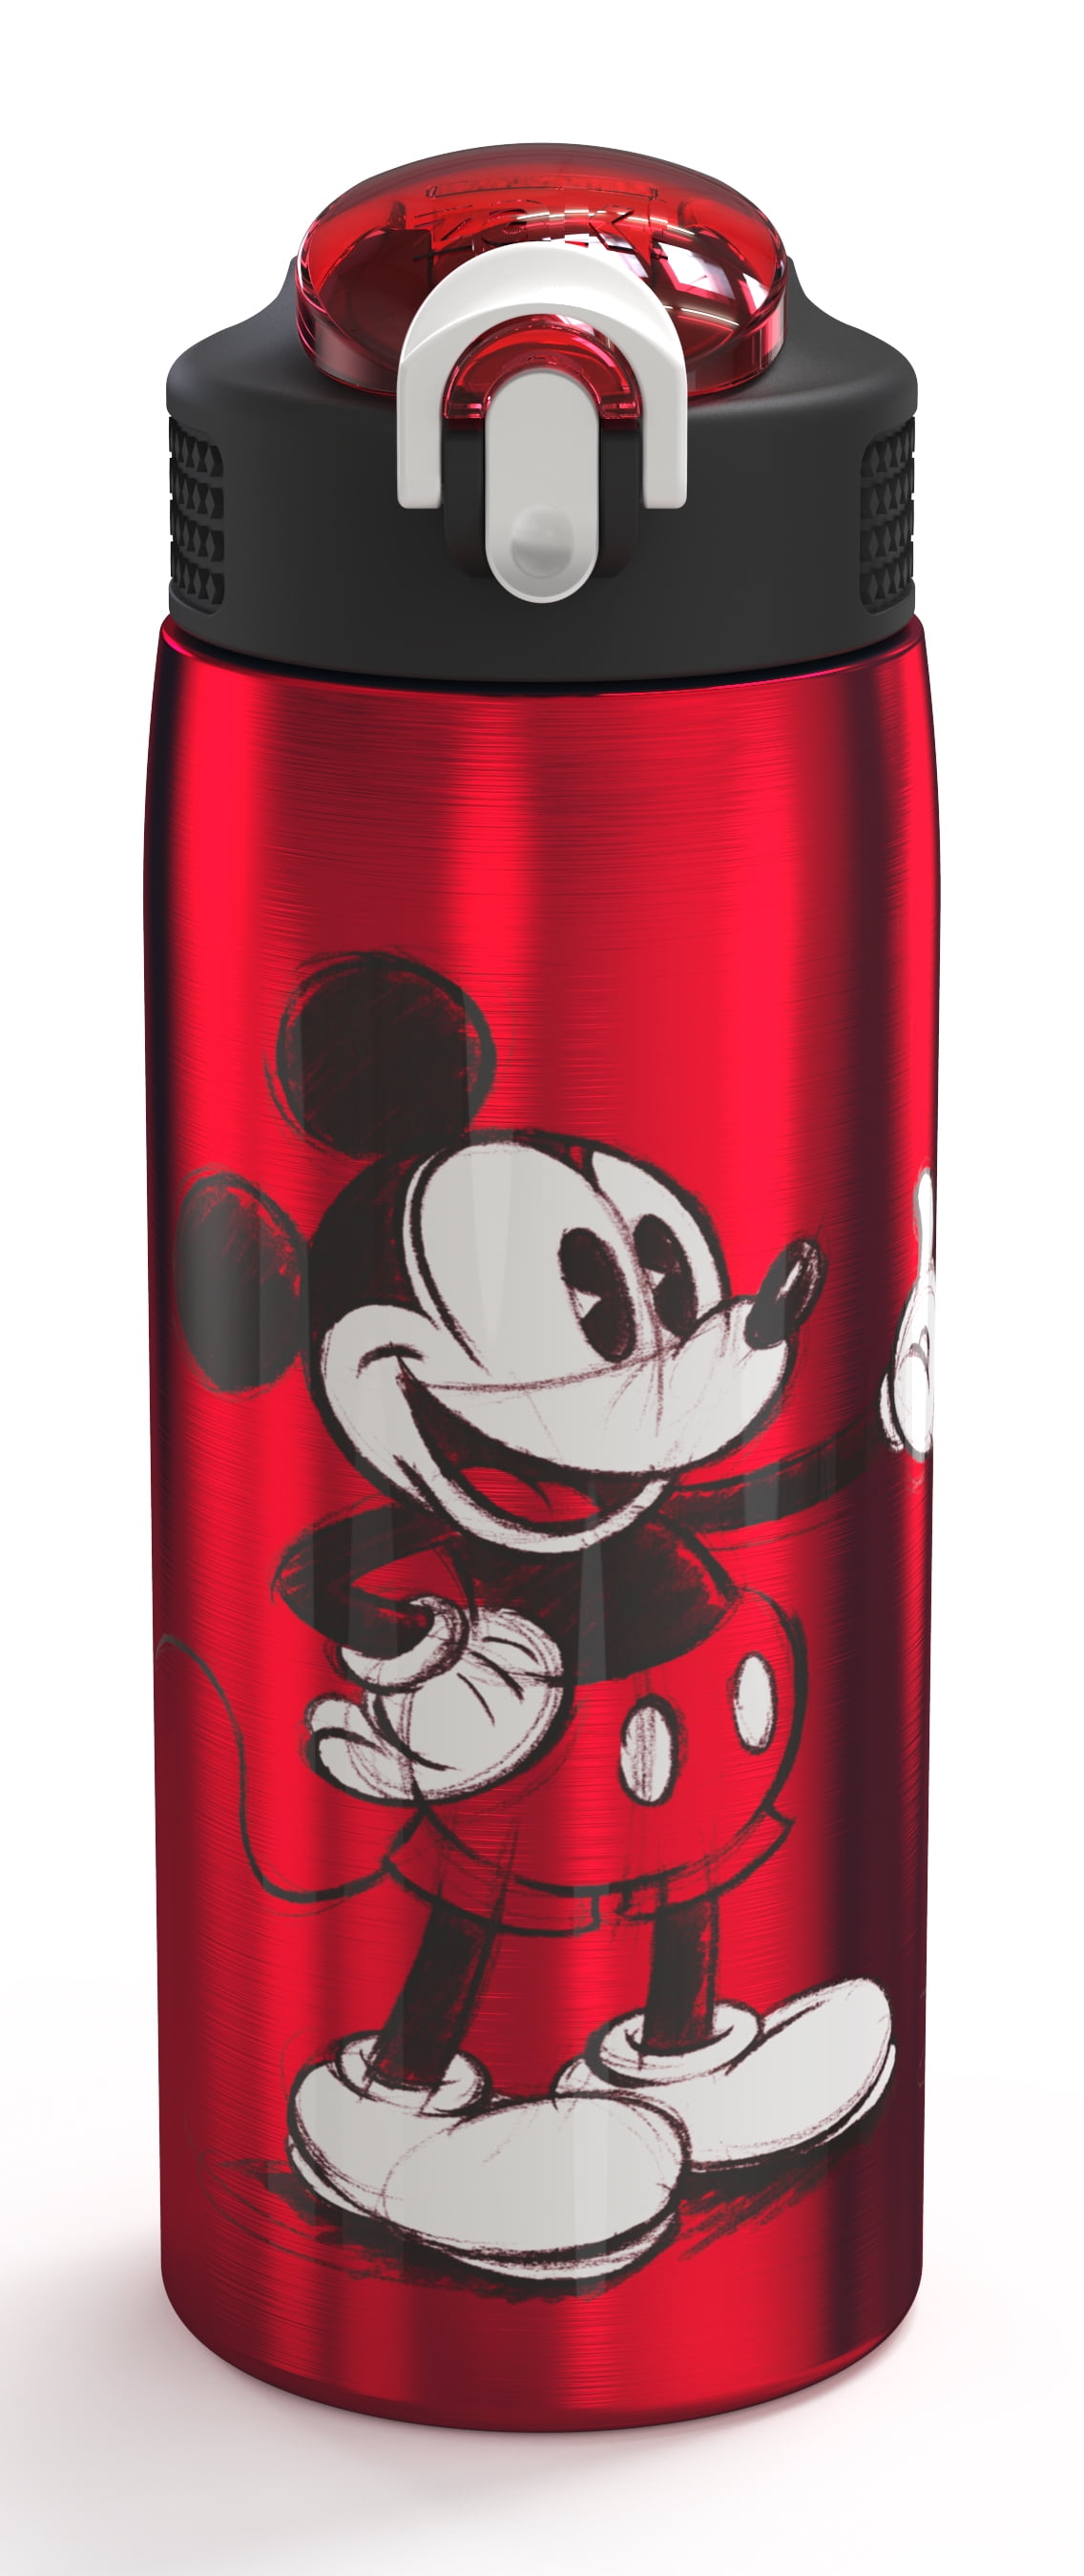 Surfing Mouse Stainless Steel Water Bottle